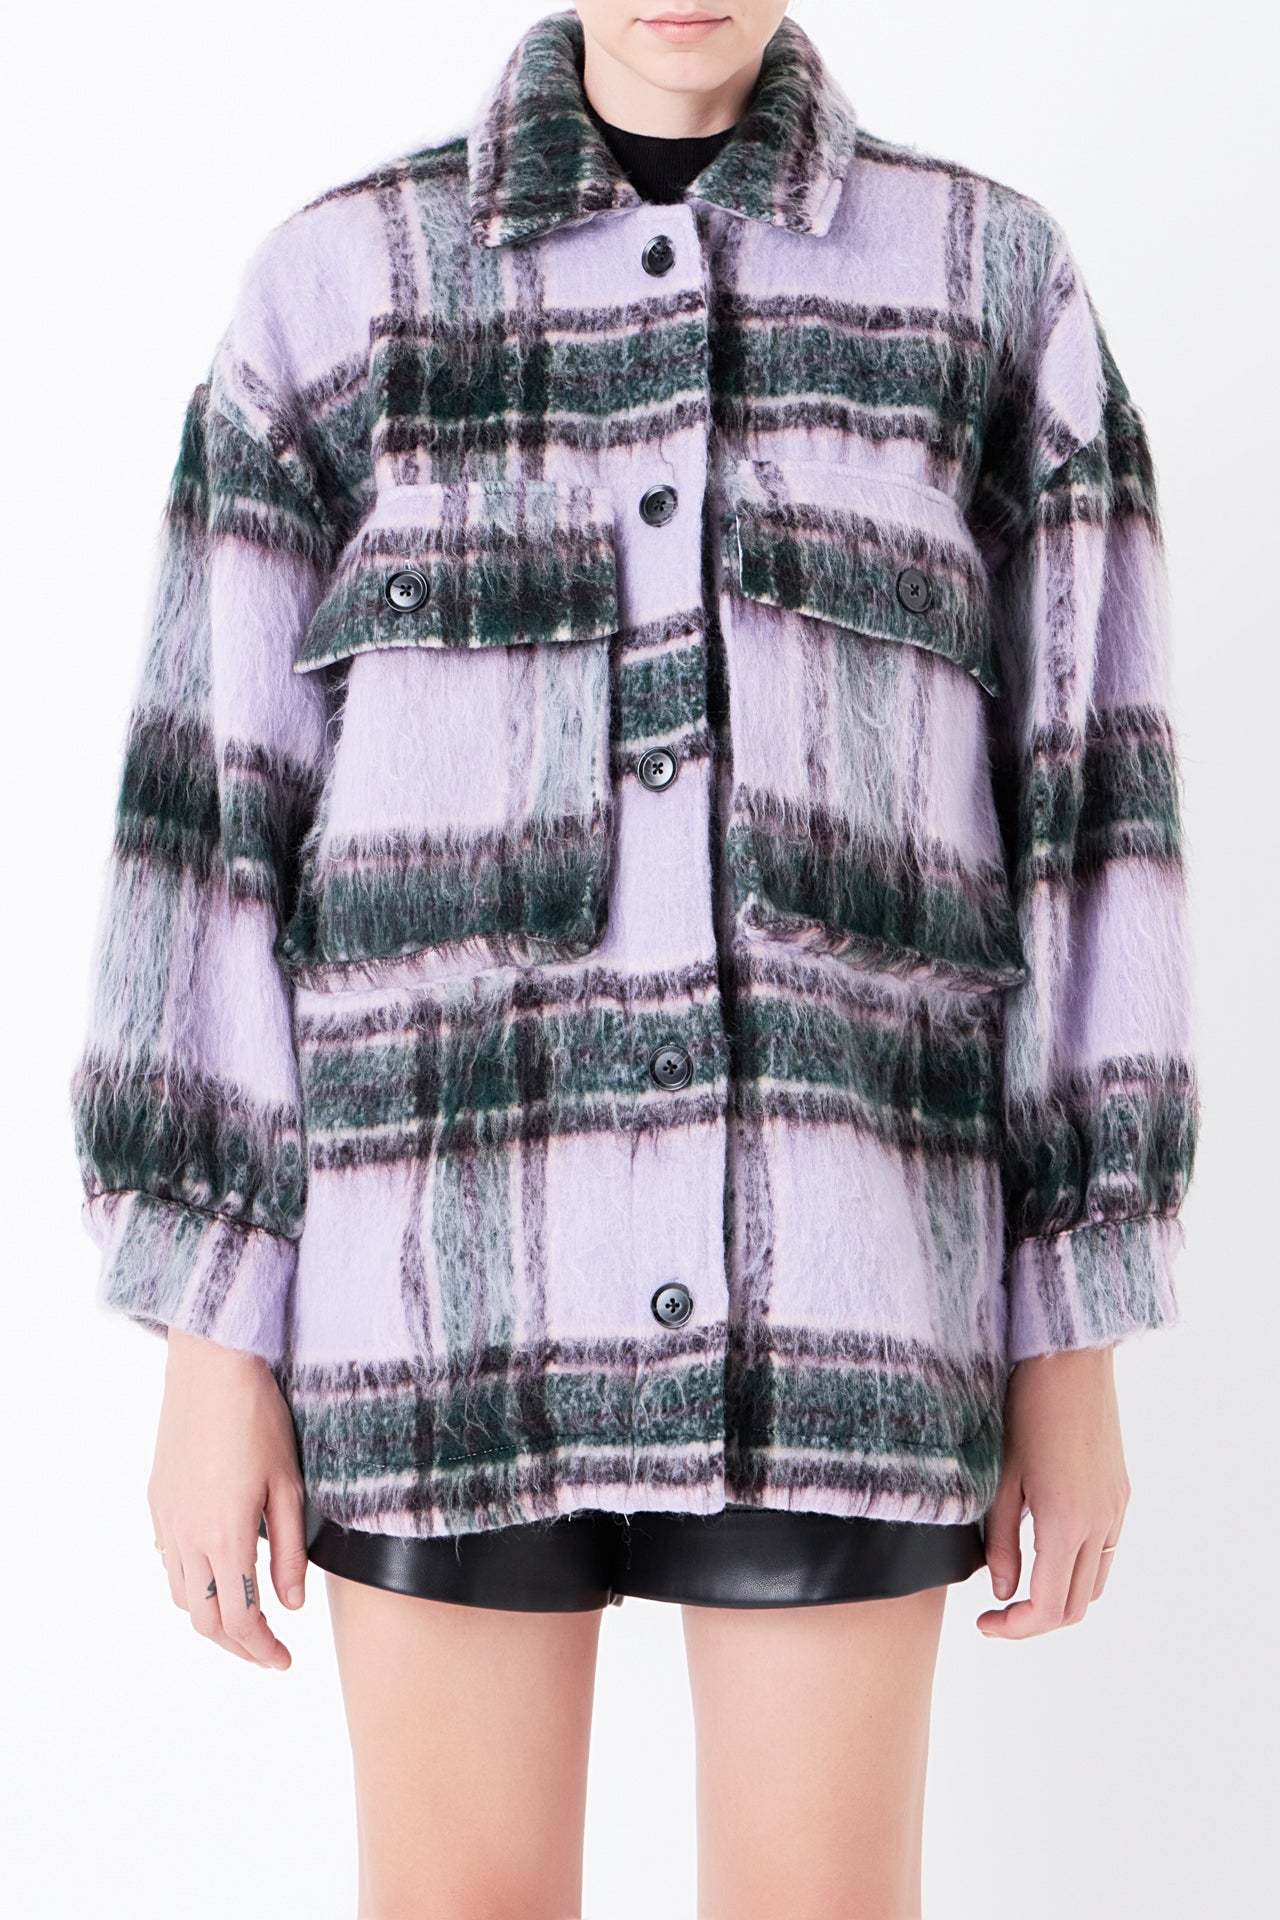 SALE OF Oversized Plaid Shacket with Pockets